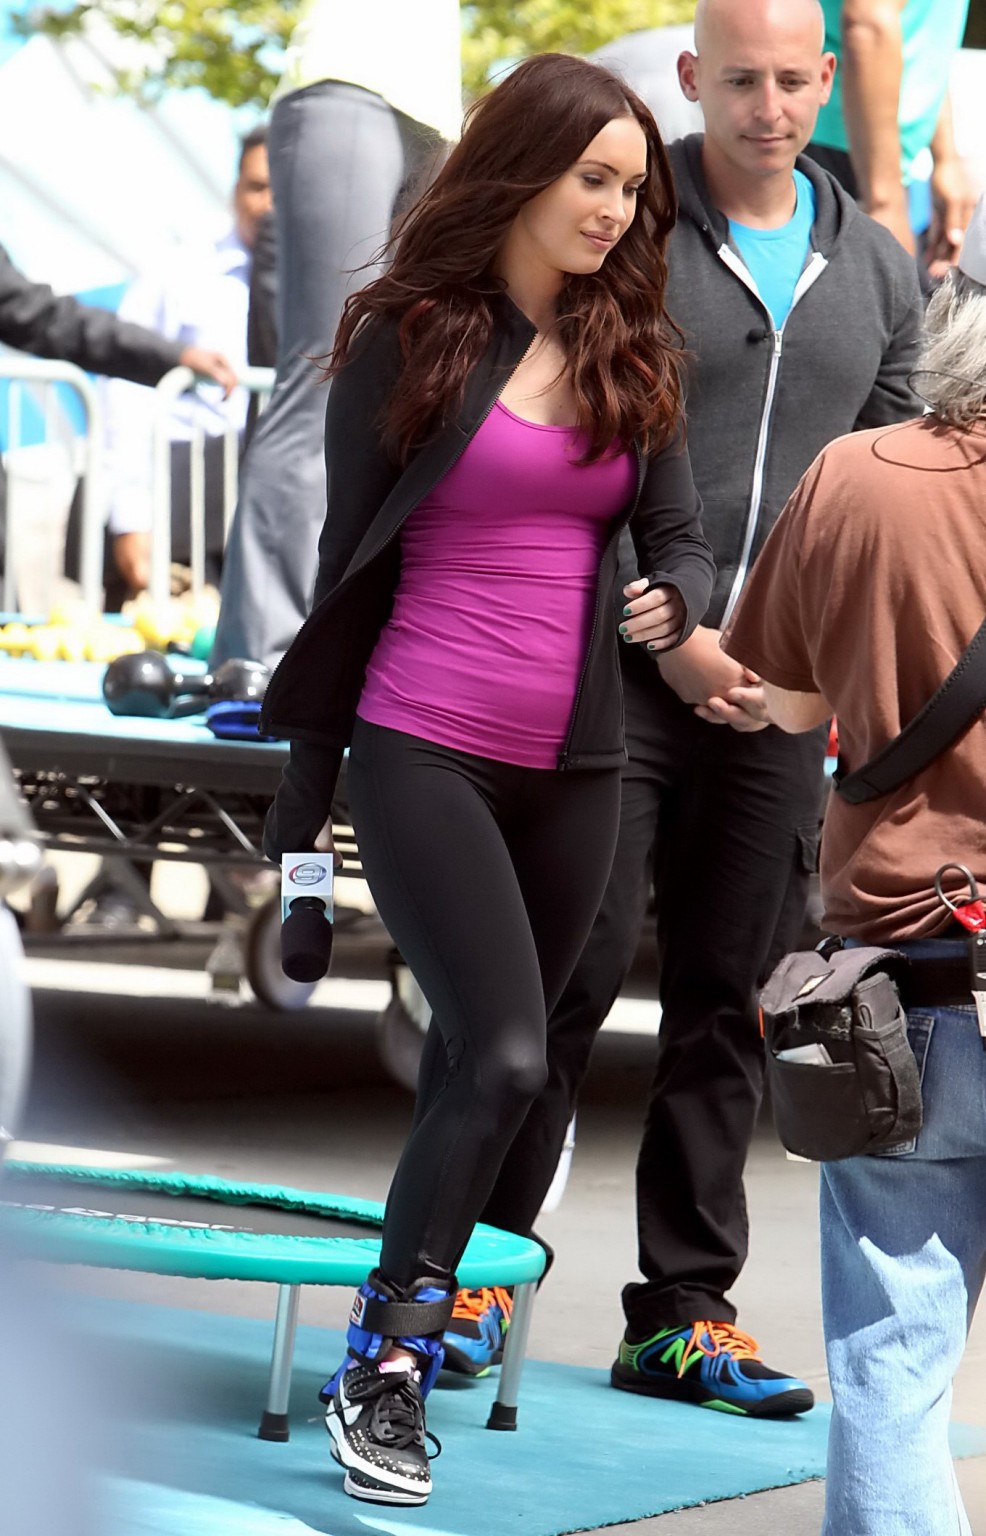 Megan Fox cleavy wearing tight outfit while jumps on trampoline at the TMNT set #75233059